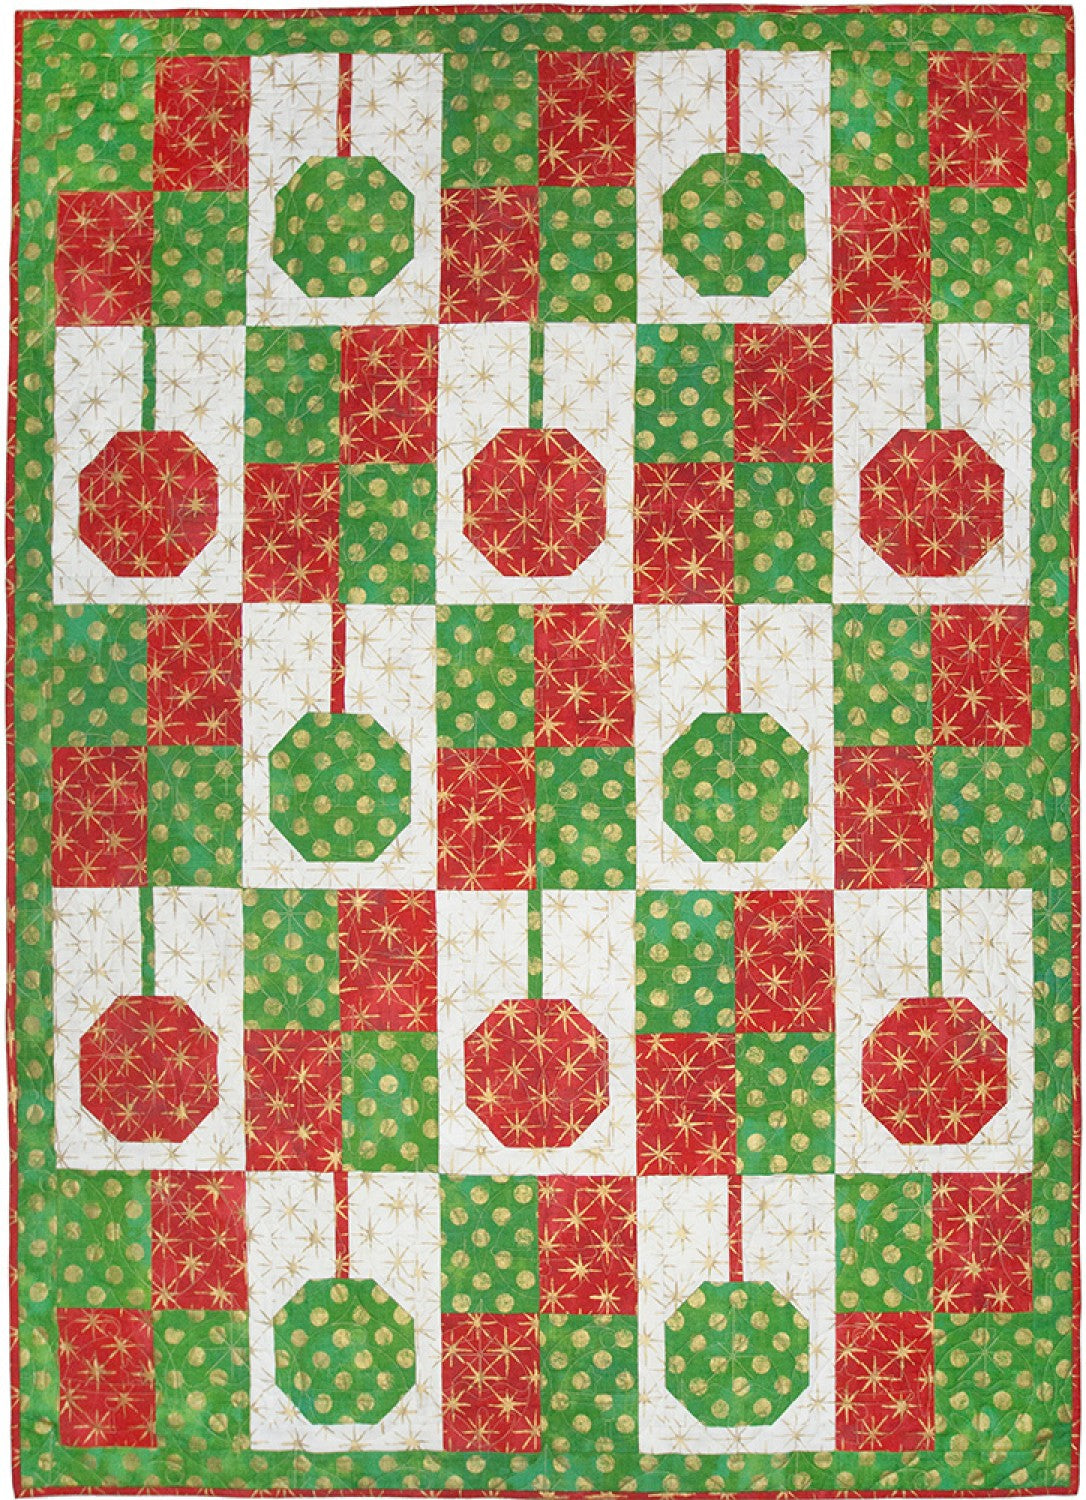 Make It Christmas with 3 Yard Quilts Book by Donna Robertson and